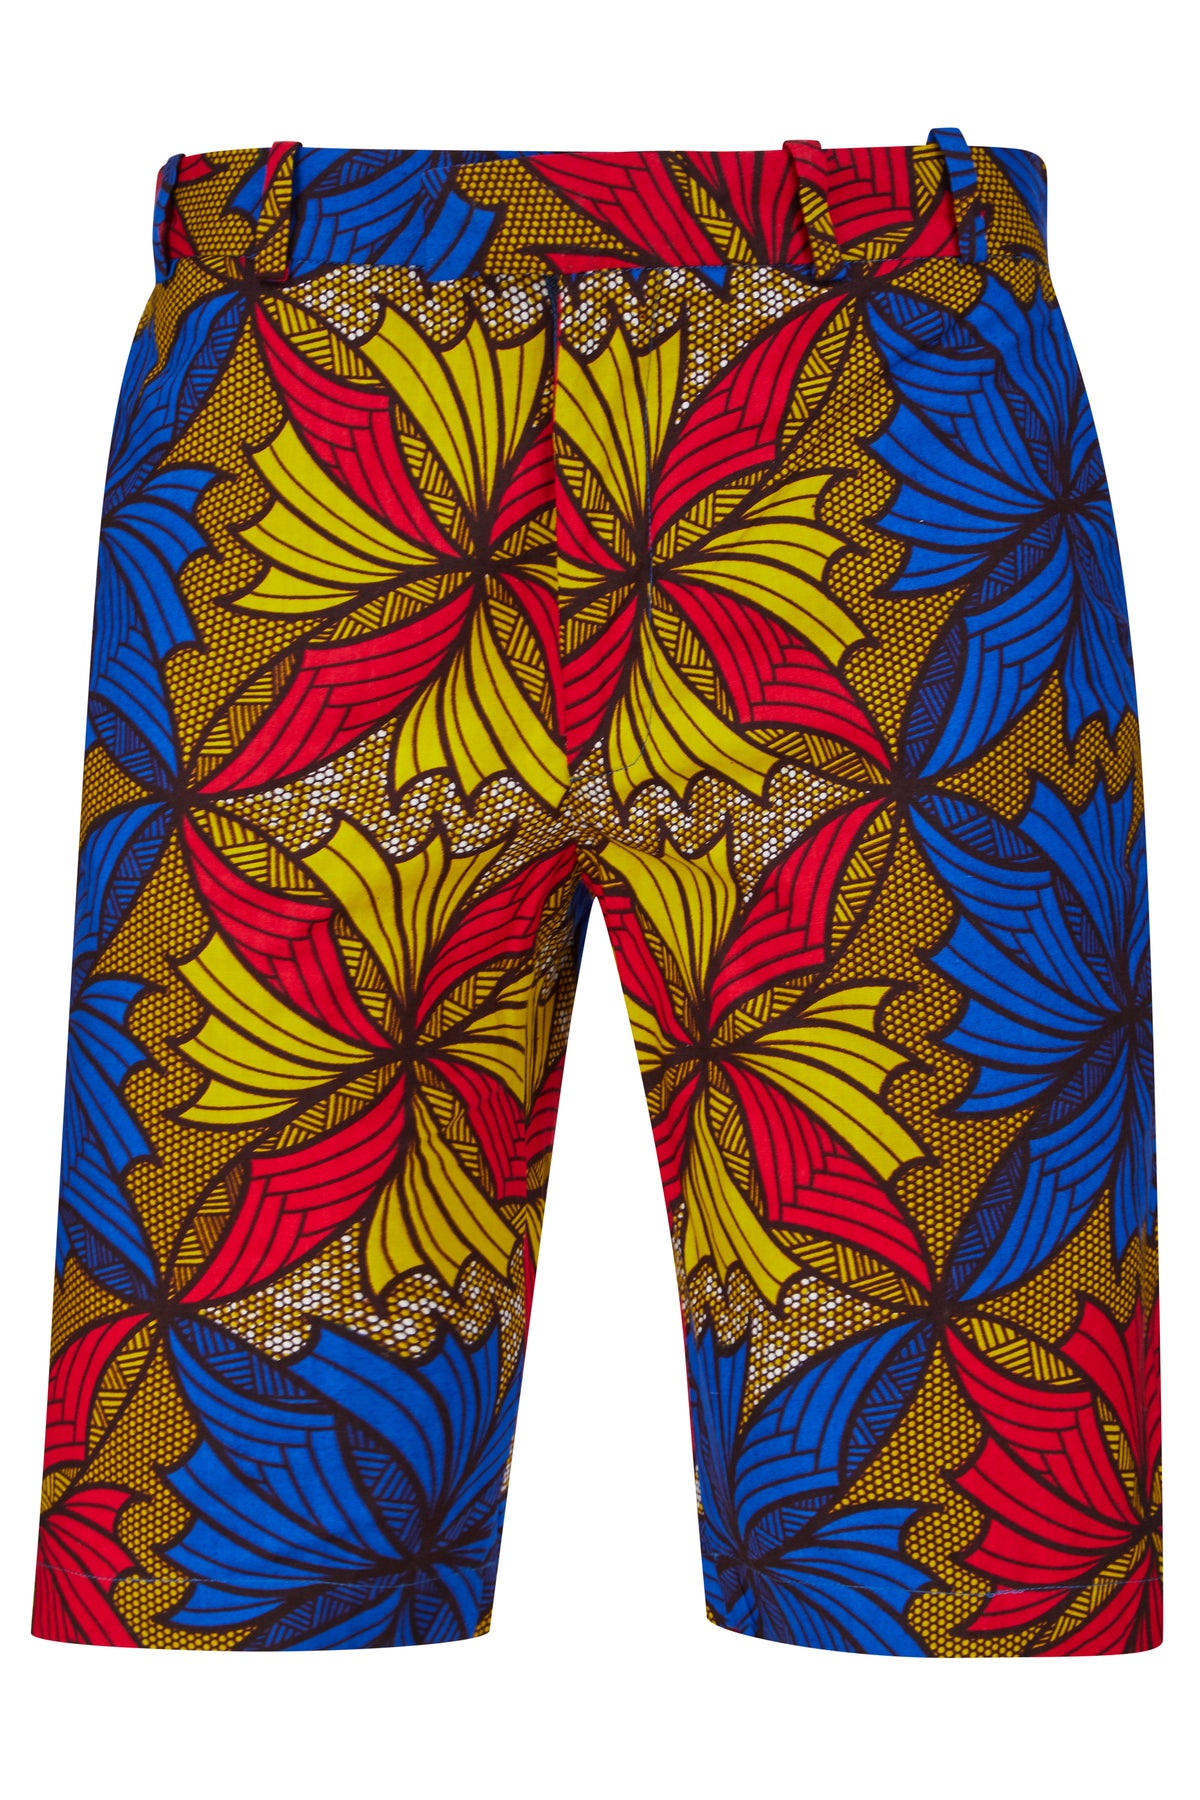 Jamie African print shorts-3D Floral - OHEMA OHENE AFRICAN INSPIRED FASHION